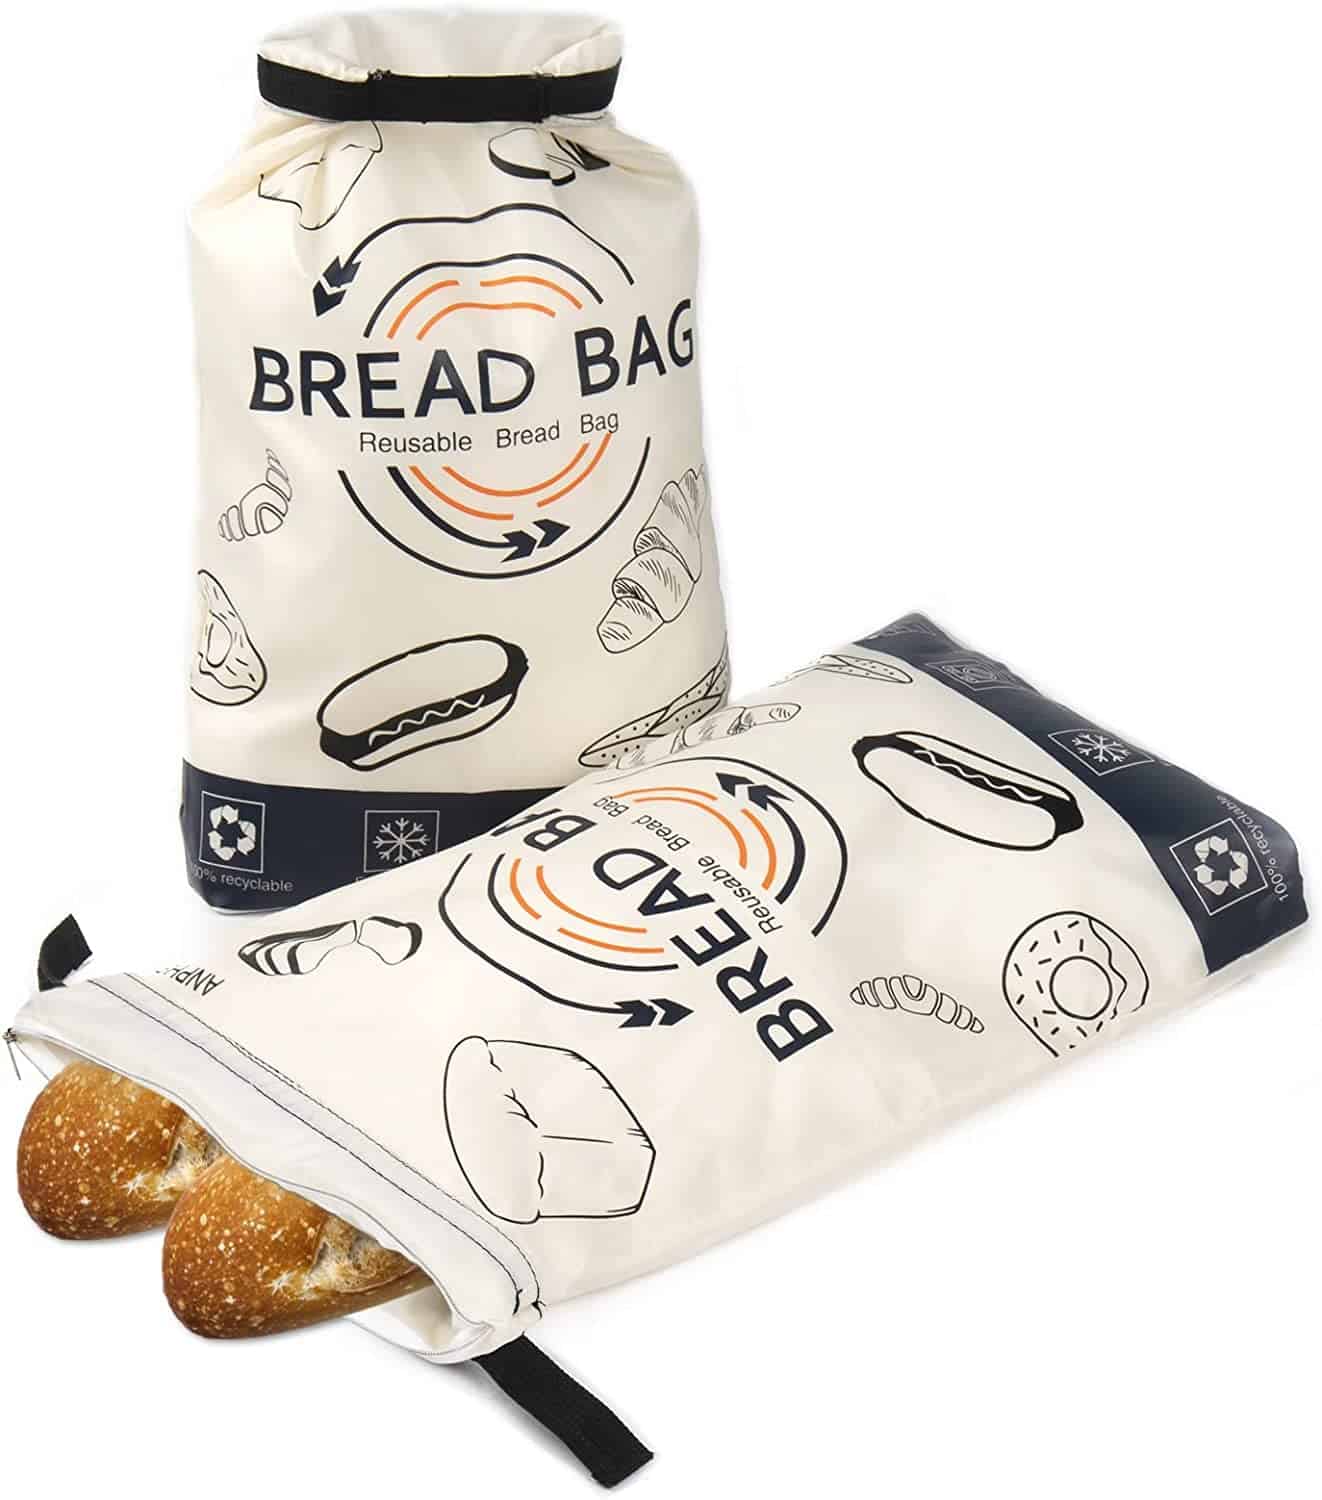 Reusable Freezer Bread Bags for Homemade Bread- Eco-friendly Zipper Bread Storage Bags with Hook and Loop Fasteners to Double Keep Bread Fresh, Bread Container for Sourdough Loafs (2 Pack )